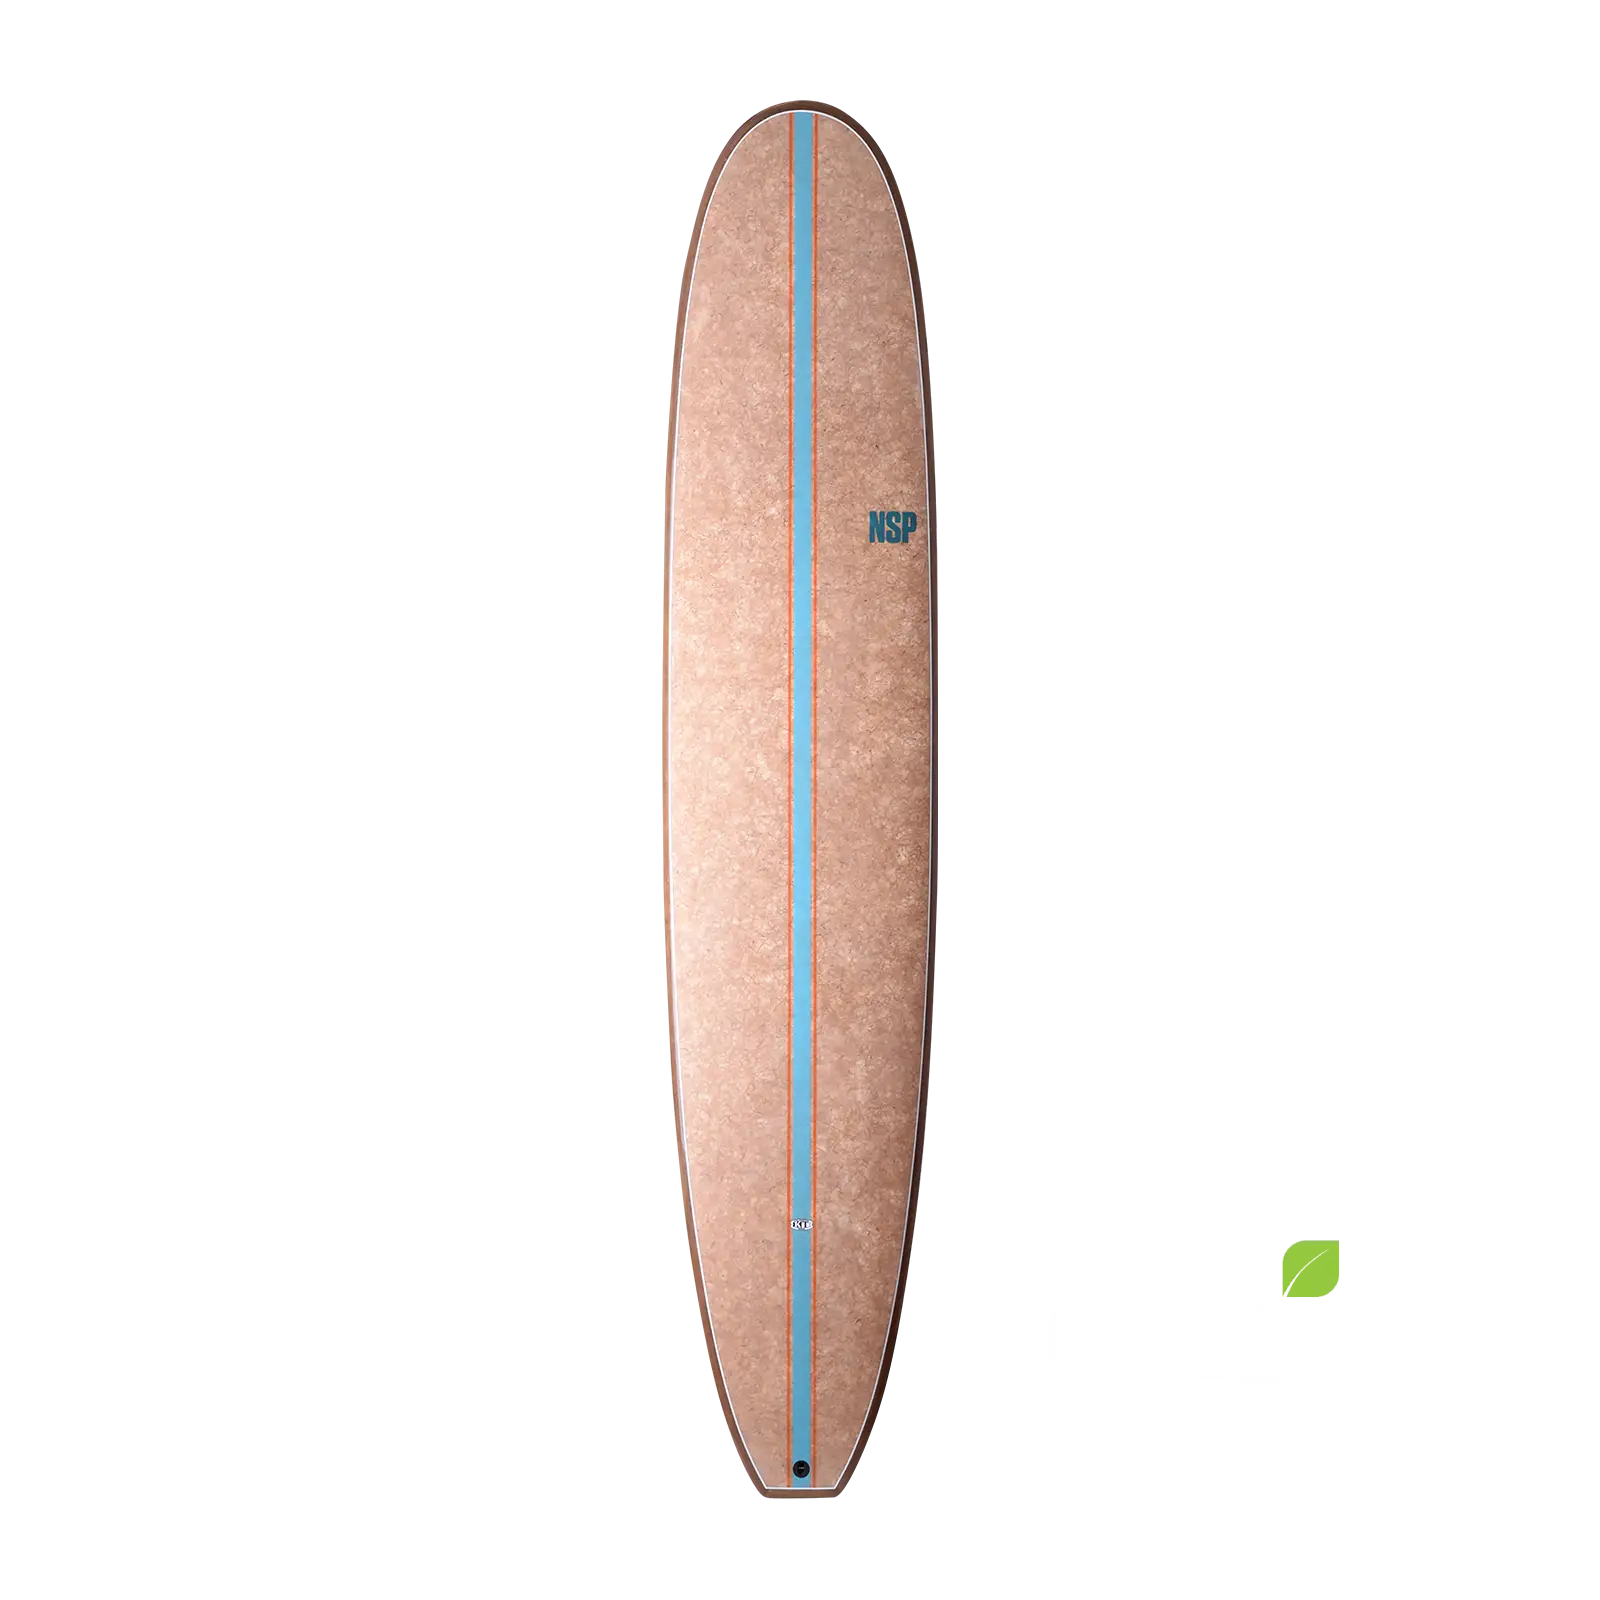 NSP Endless CocoFlax 9'6" | 74.4 L Natural NSP Europe